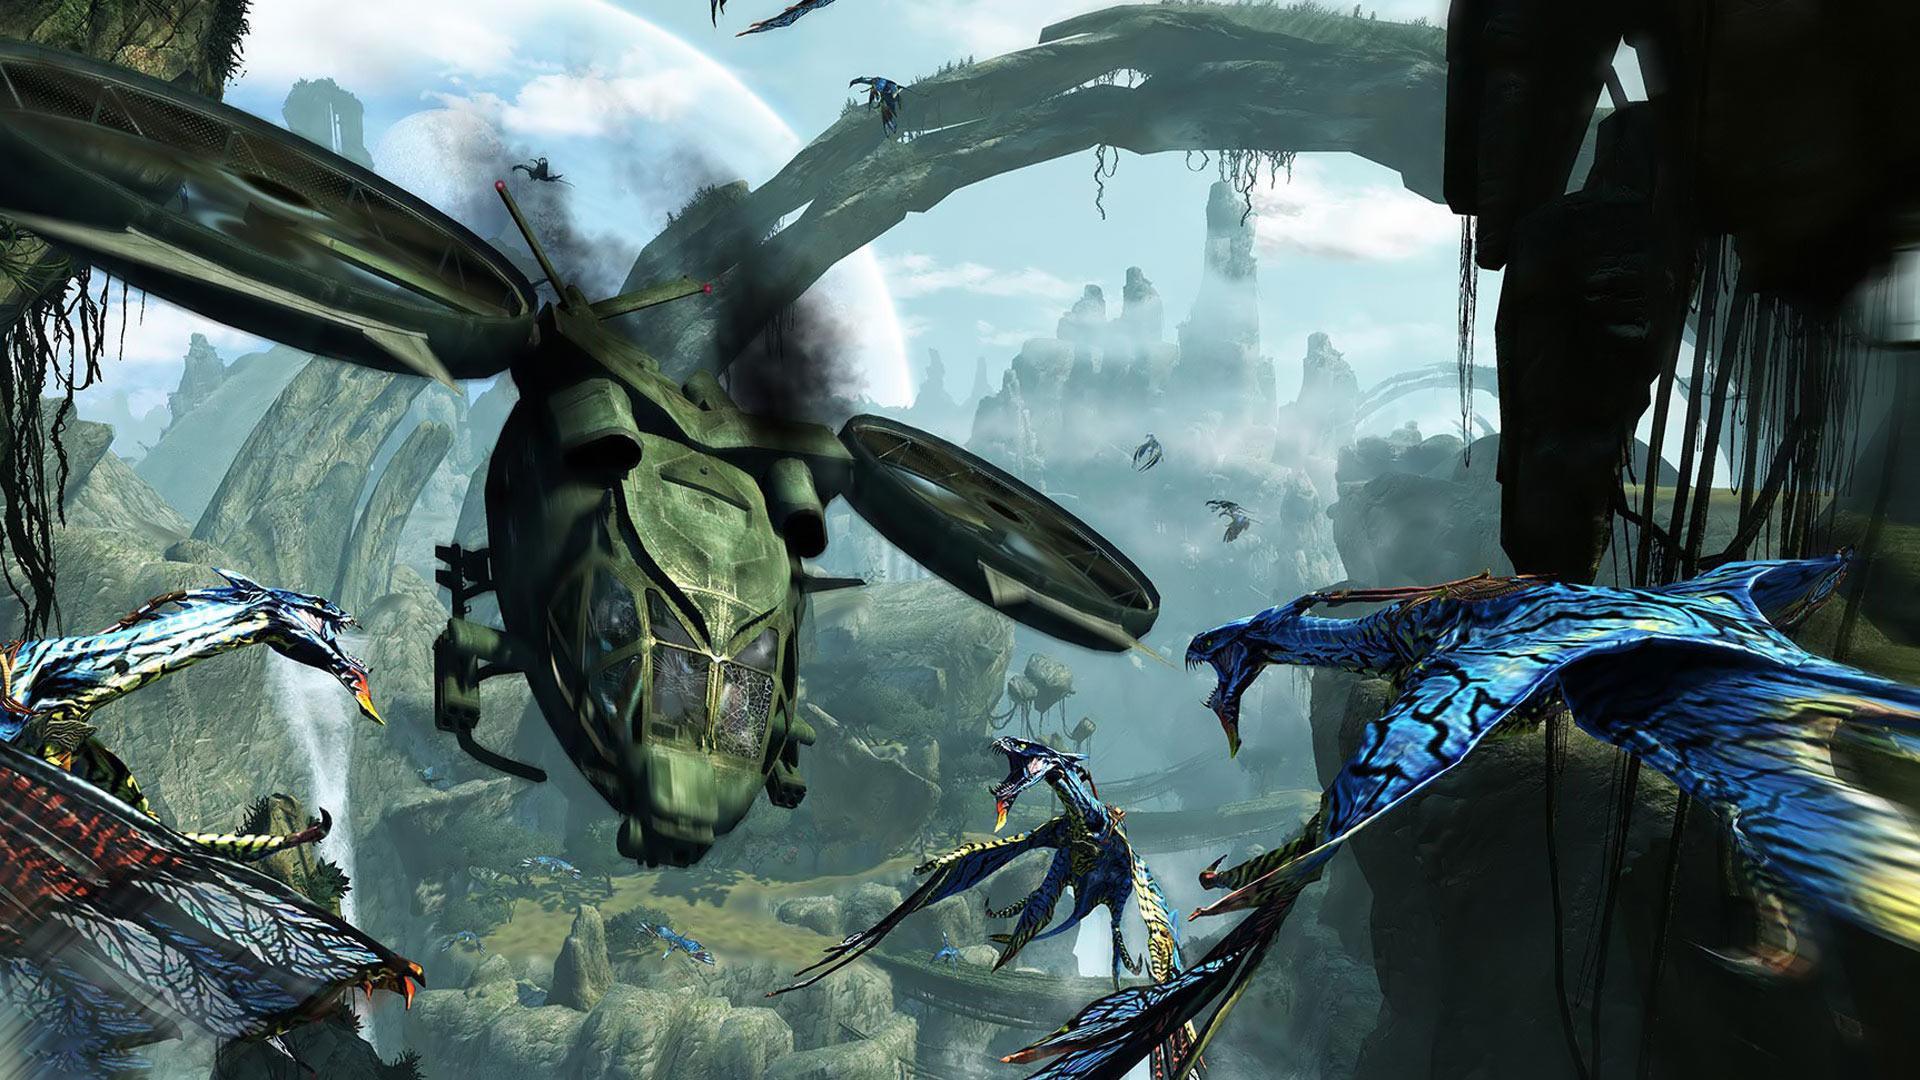 Avatar Helicopter Dragons and helicopters fighting avatar Movies ...